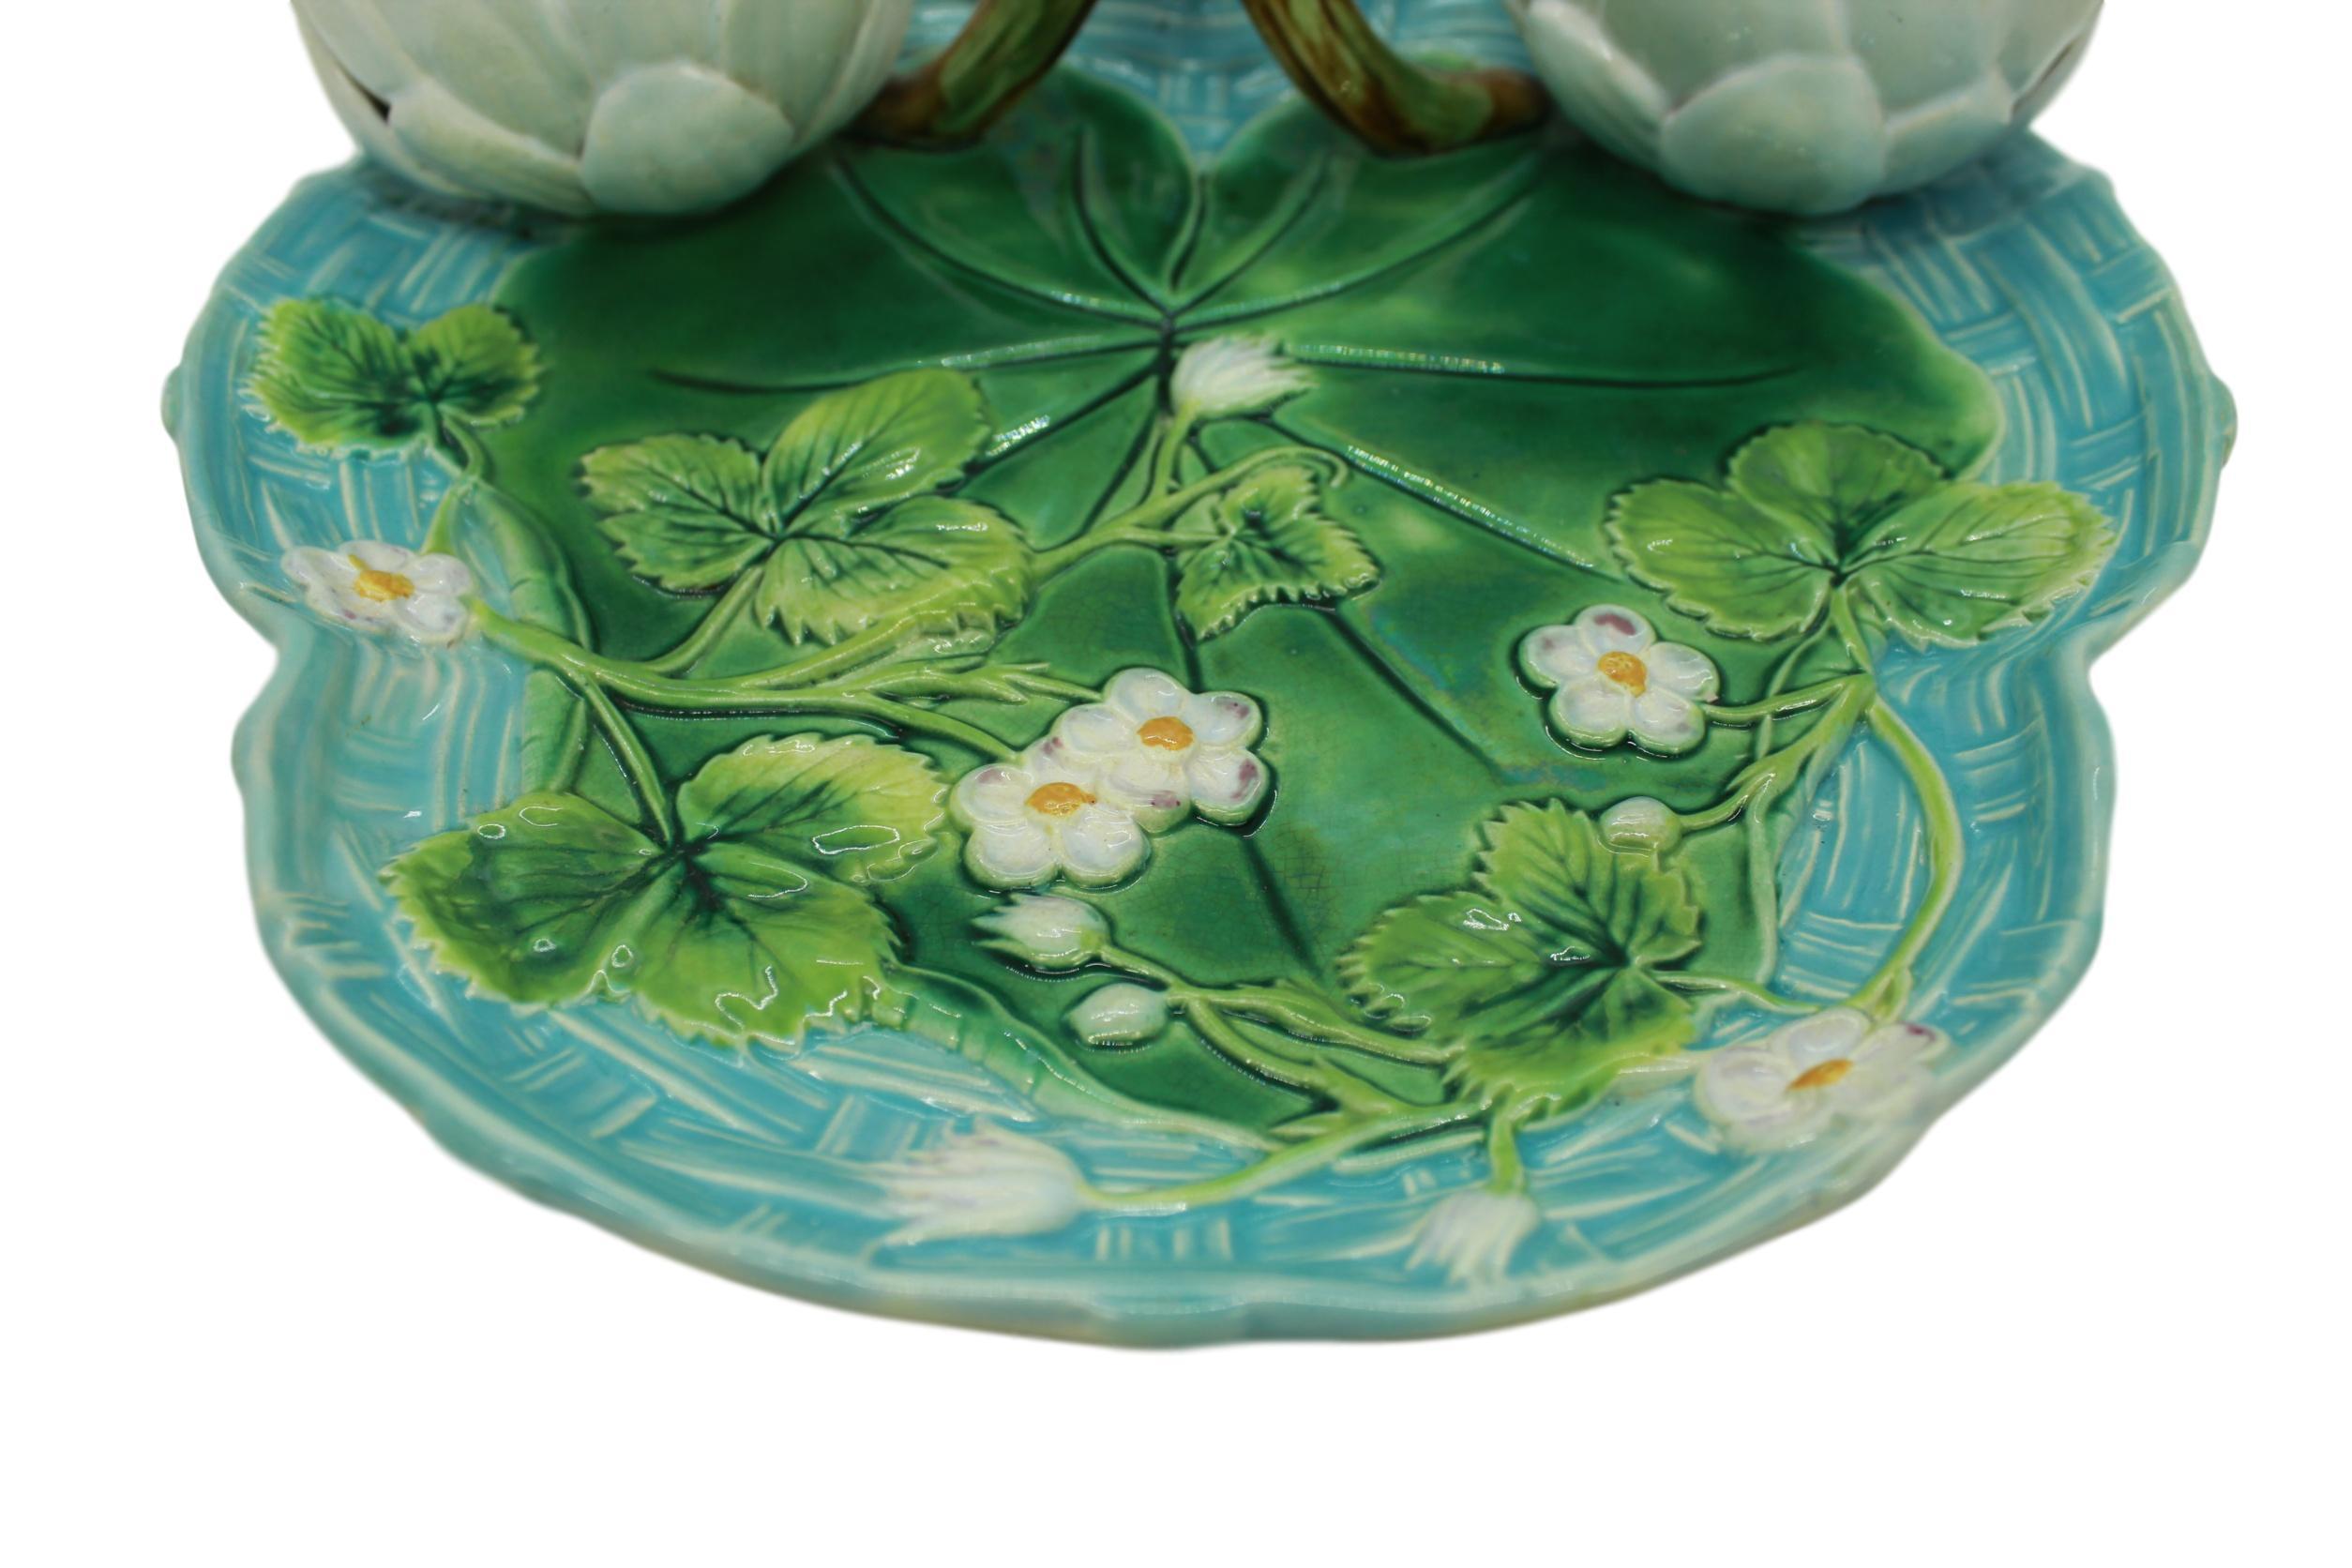 Molded George Jones Majolica Strawberry Server Turquoise and Green, English, Dated 1877